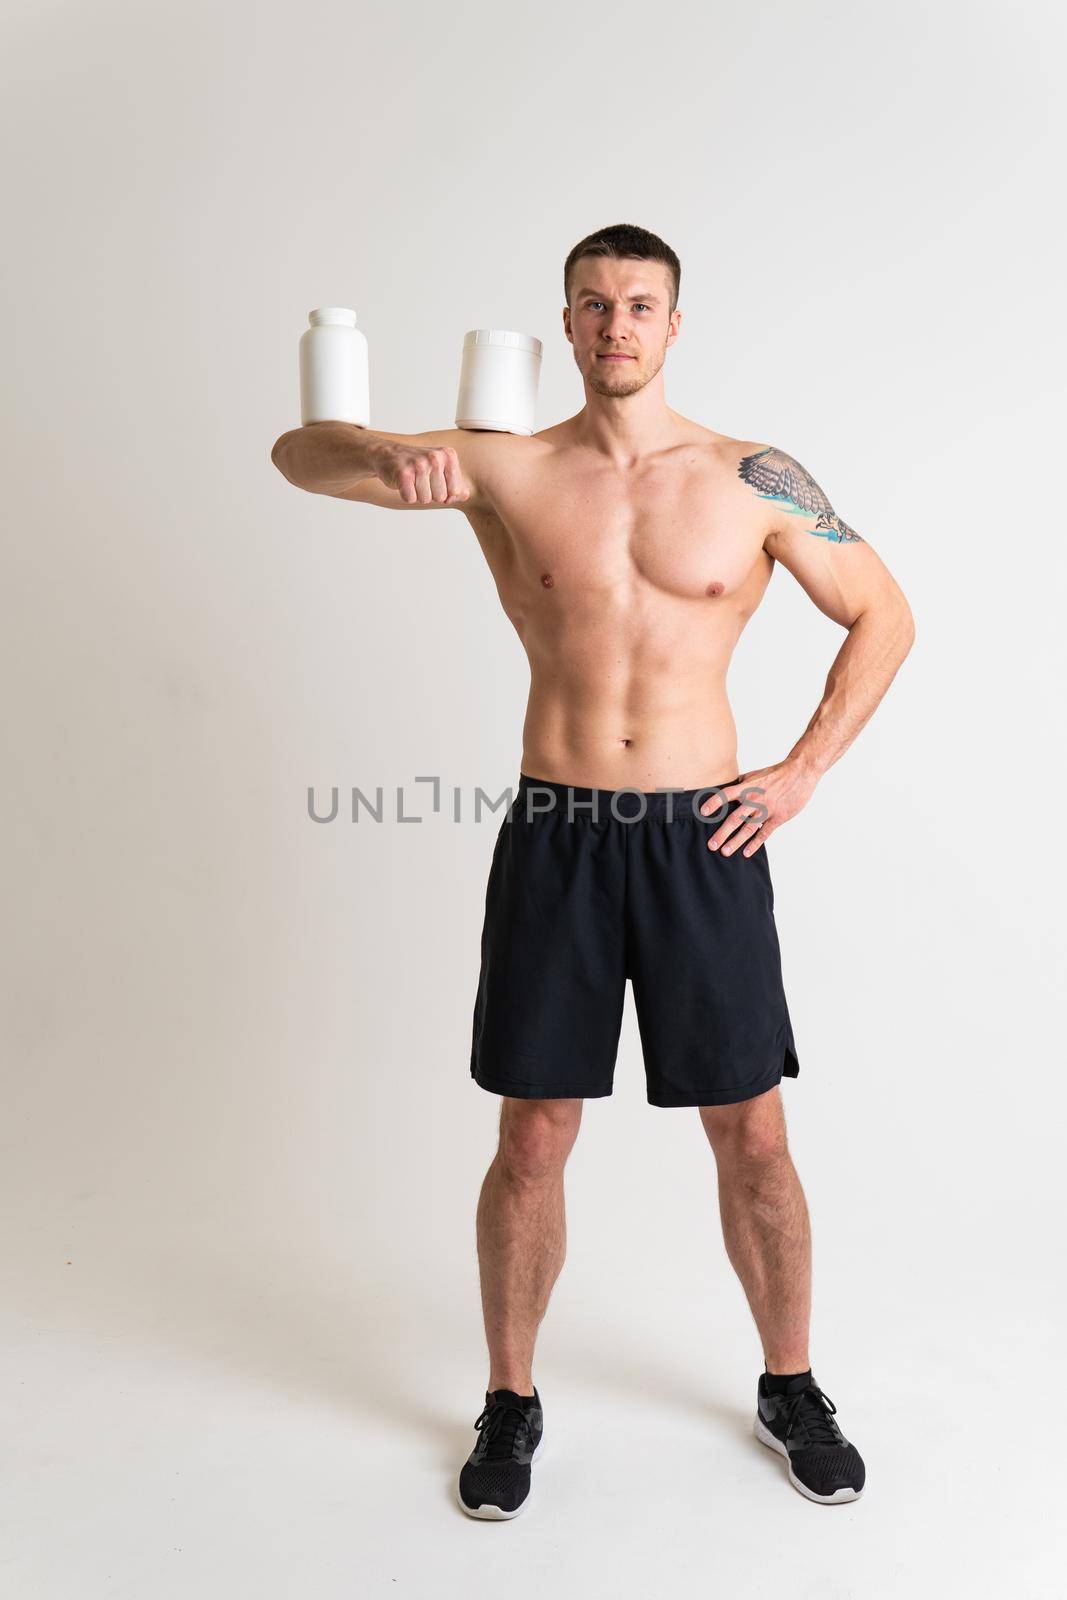 Fitness protein jars white on white background bodybuilder powder strong high pain injury, cramp caucasian young adult, muscular expression. Hold neck therapy, back suffer attractive